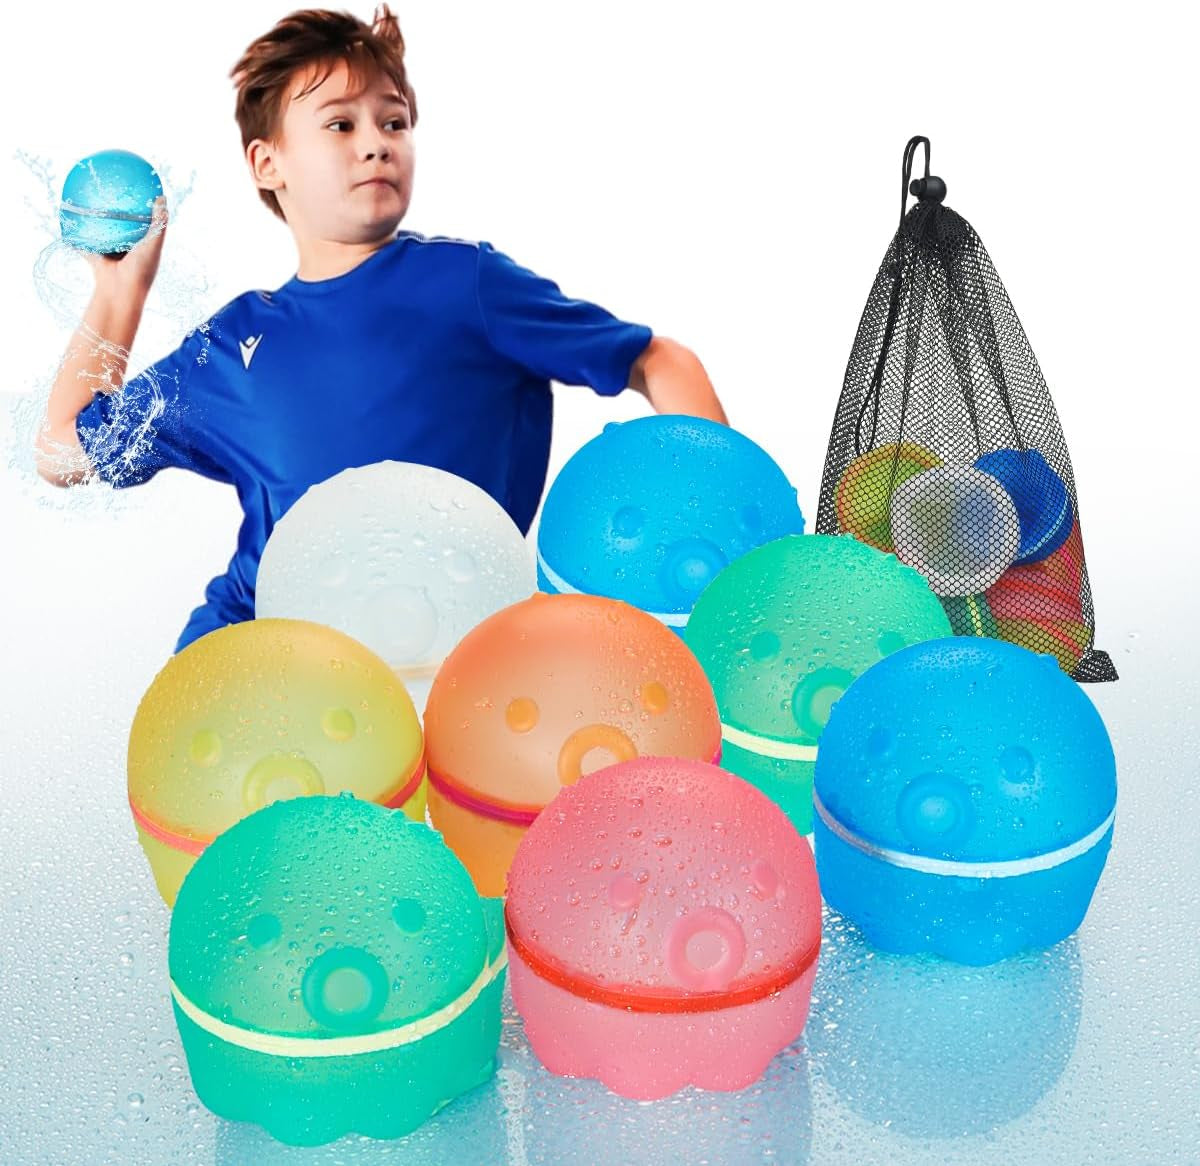 16PCS Reusable Water Balloons for Kids, Splash Refillable Water Balloons Bombs Self Sealing Quick Fill Magnetic with Mesh Bag